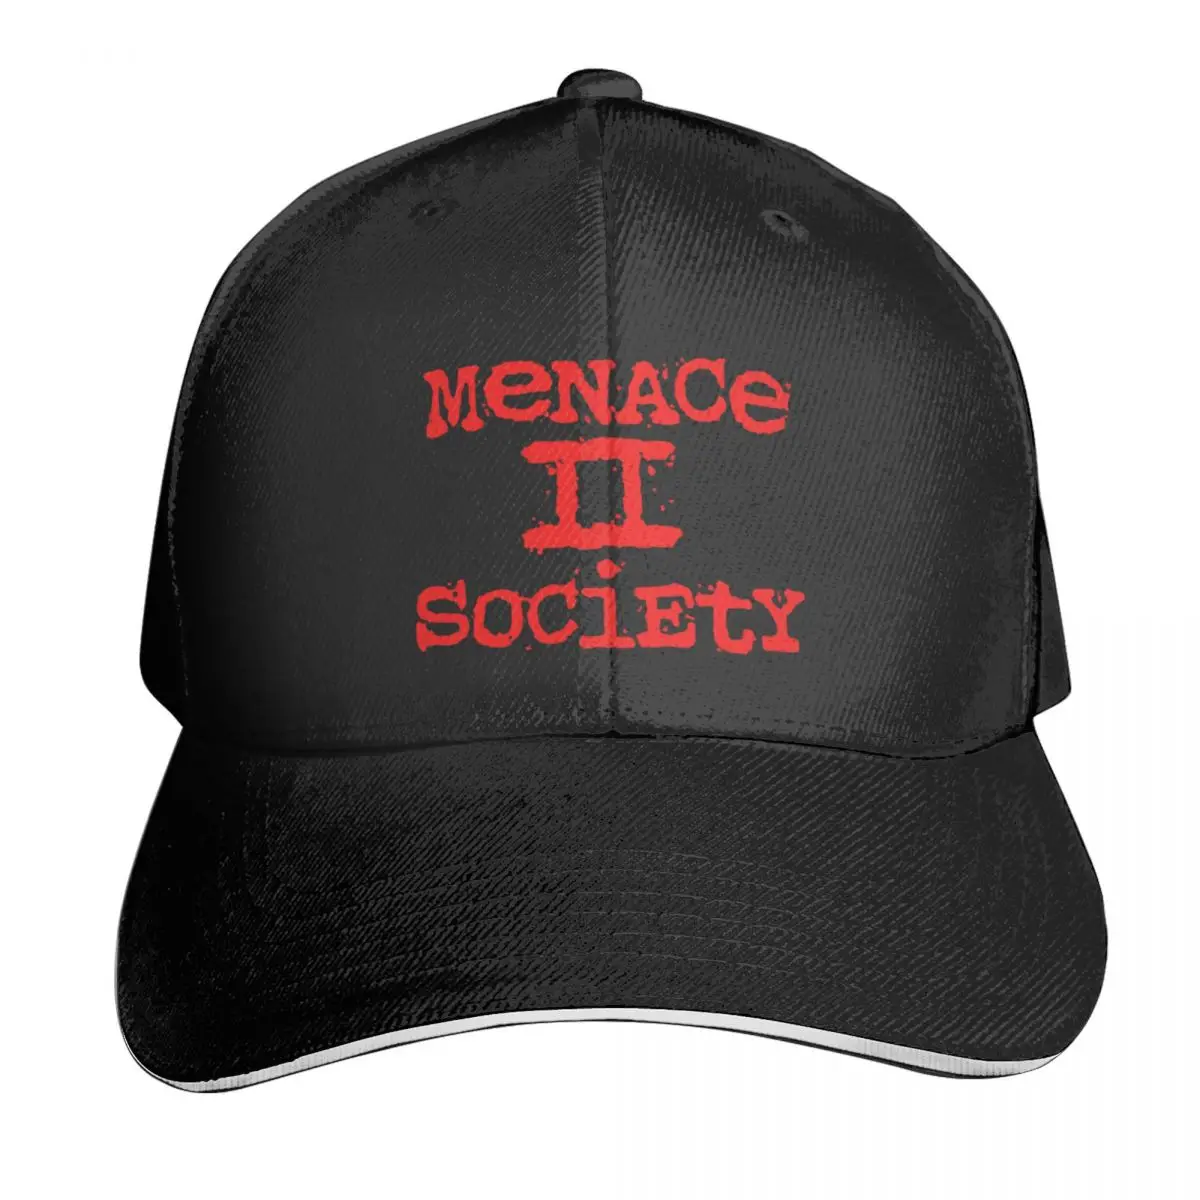 

Menace Ii Society OG Classic Casquette, Polyester Cap Holiday Moisture Wicking Curved Brim